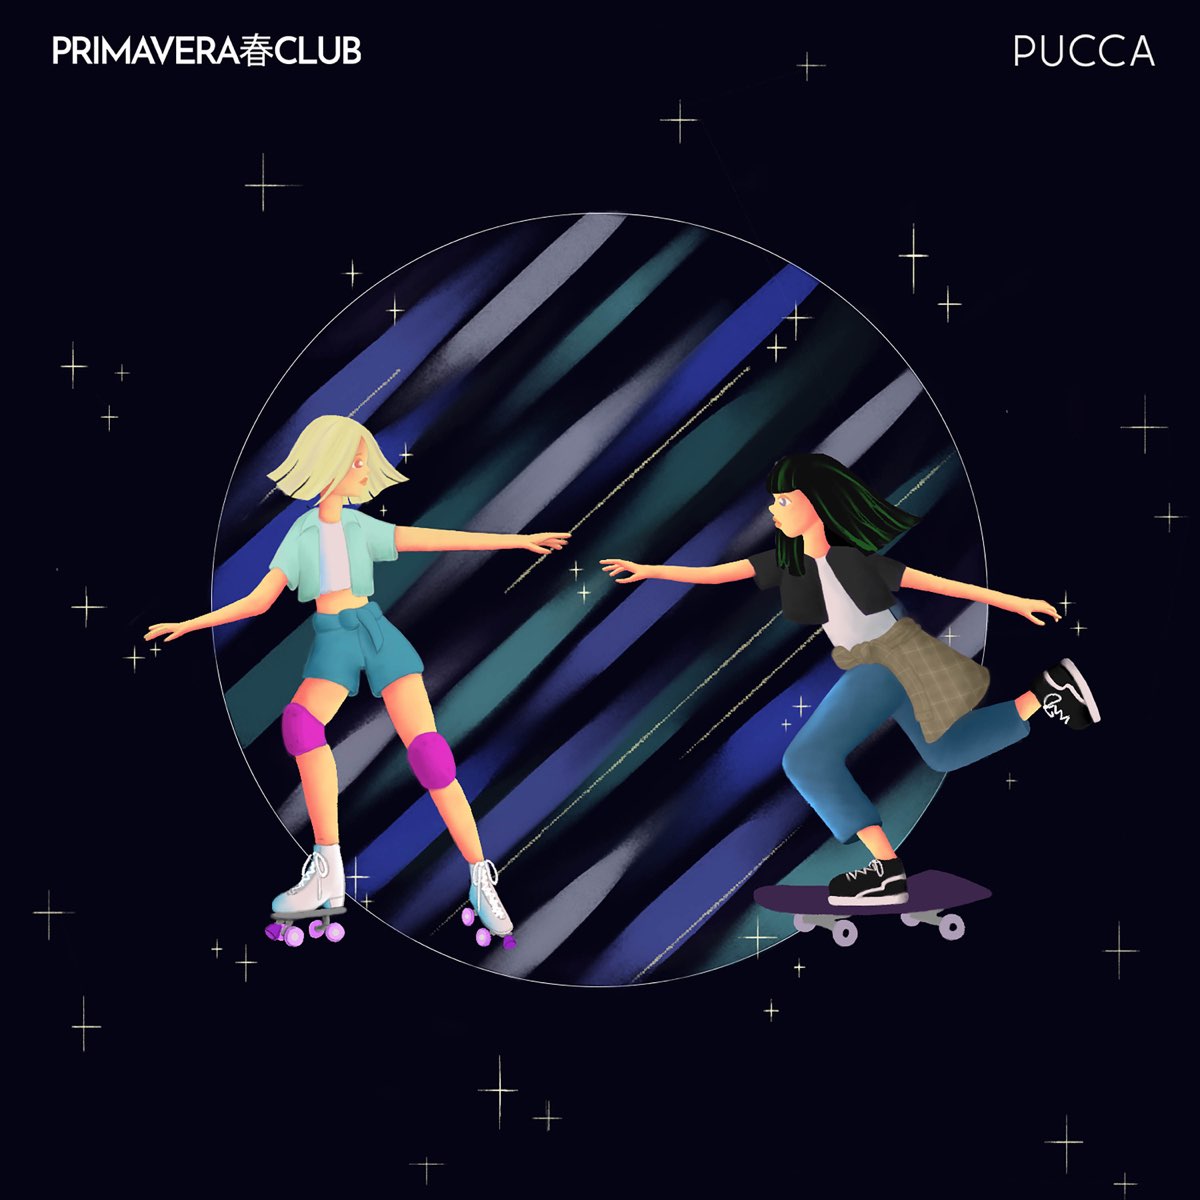 Pucca - Single by Primavera Club on Apple Music